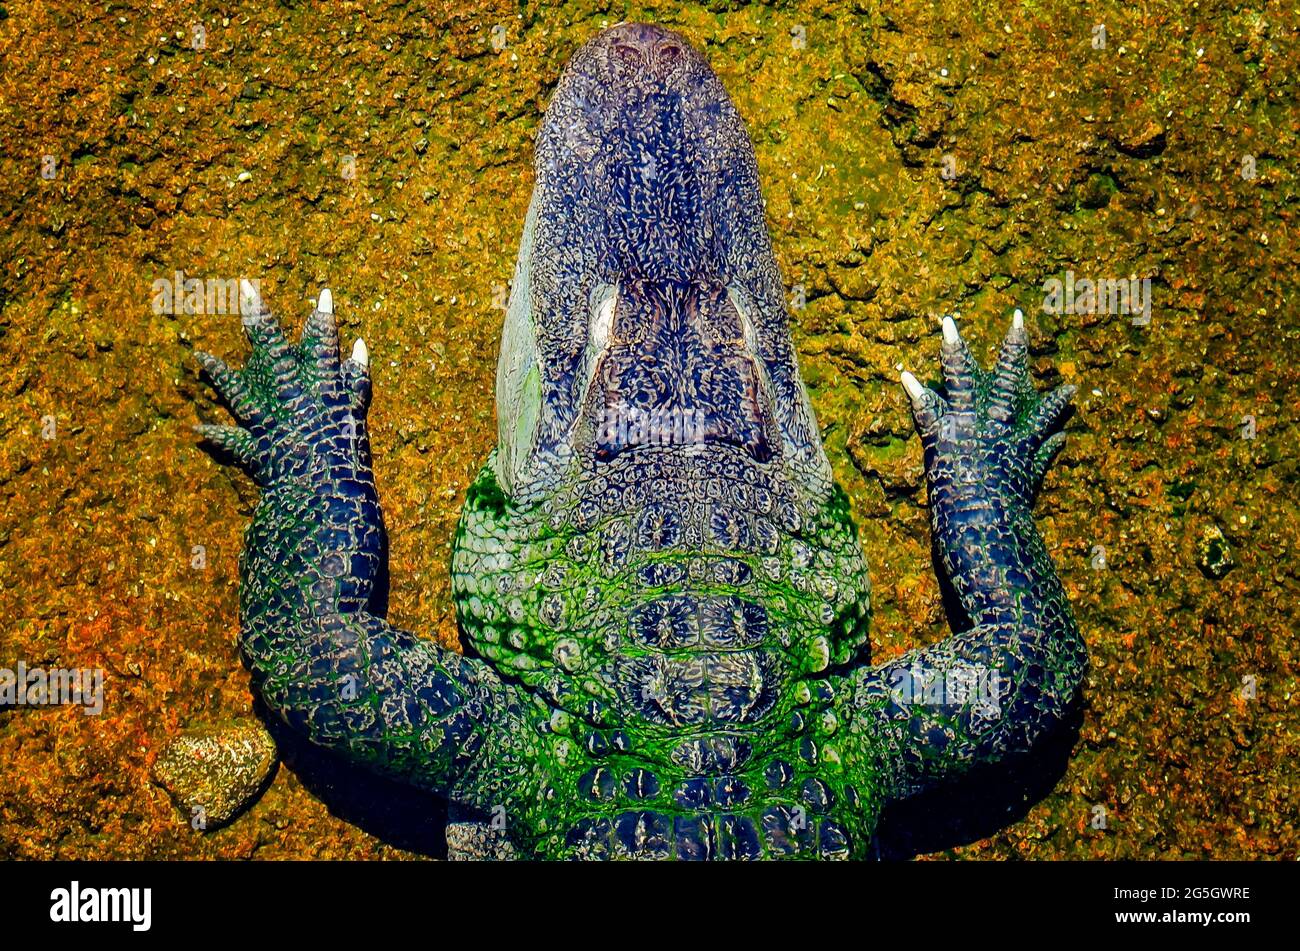 An American alligator is pictured from above at Mississippi Aquarium, June 24, 2021, in Gulfport, Mississippi. Stock Photo